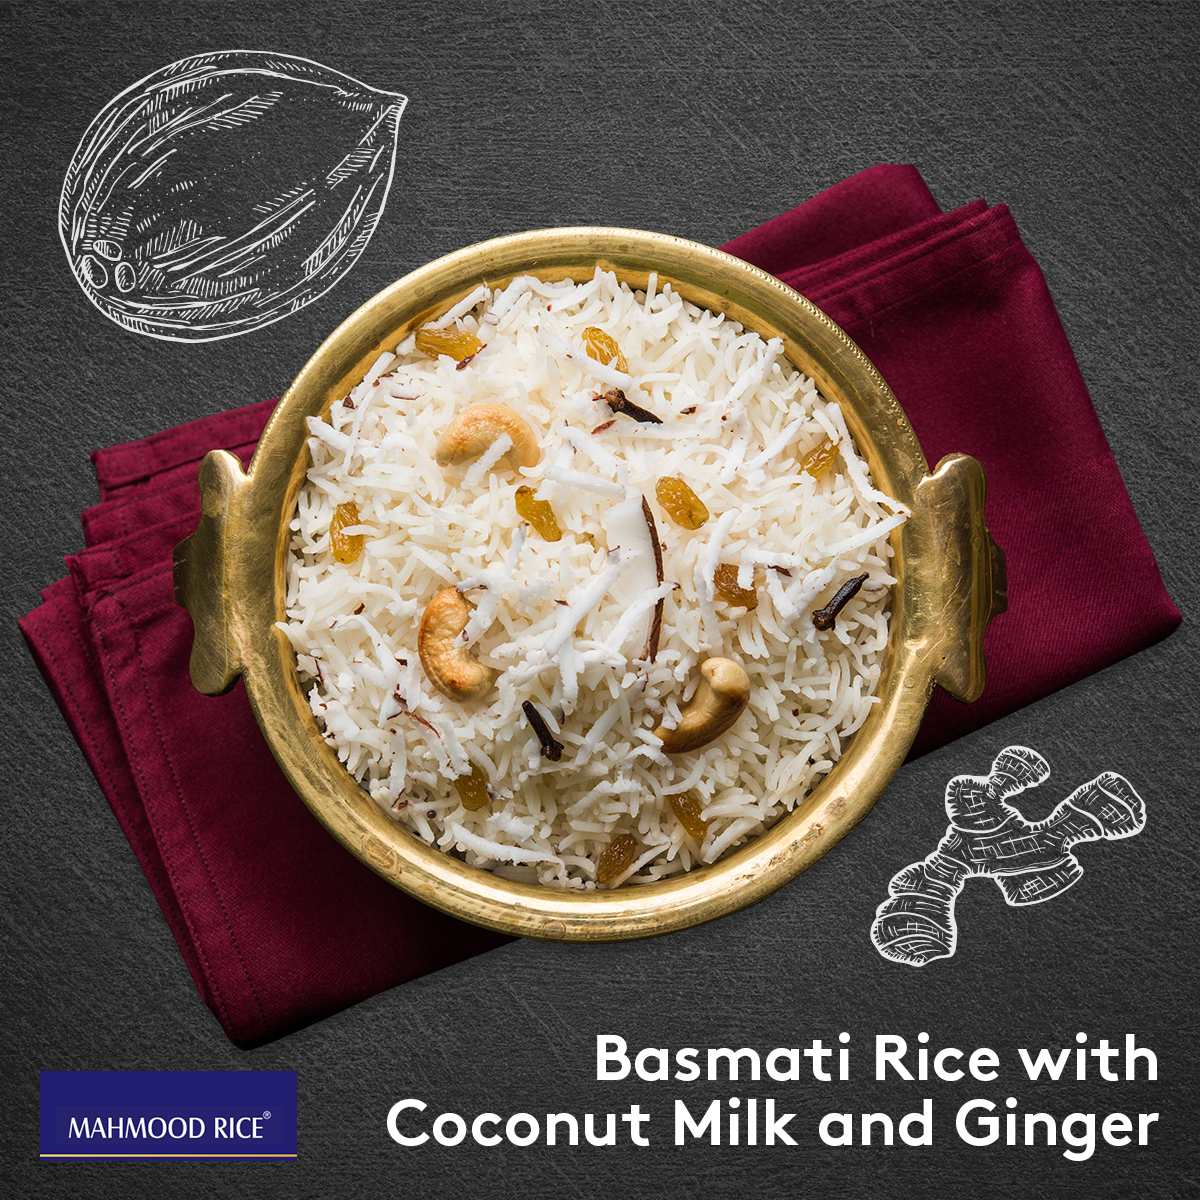 Basmati Rice with Coconut Milk and Ginger